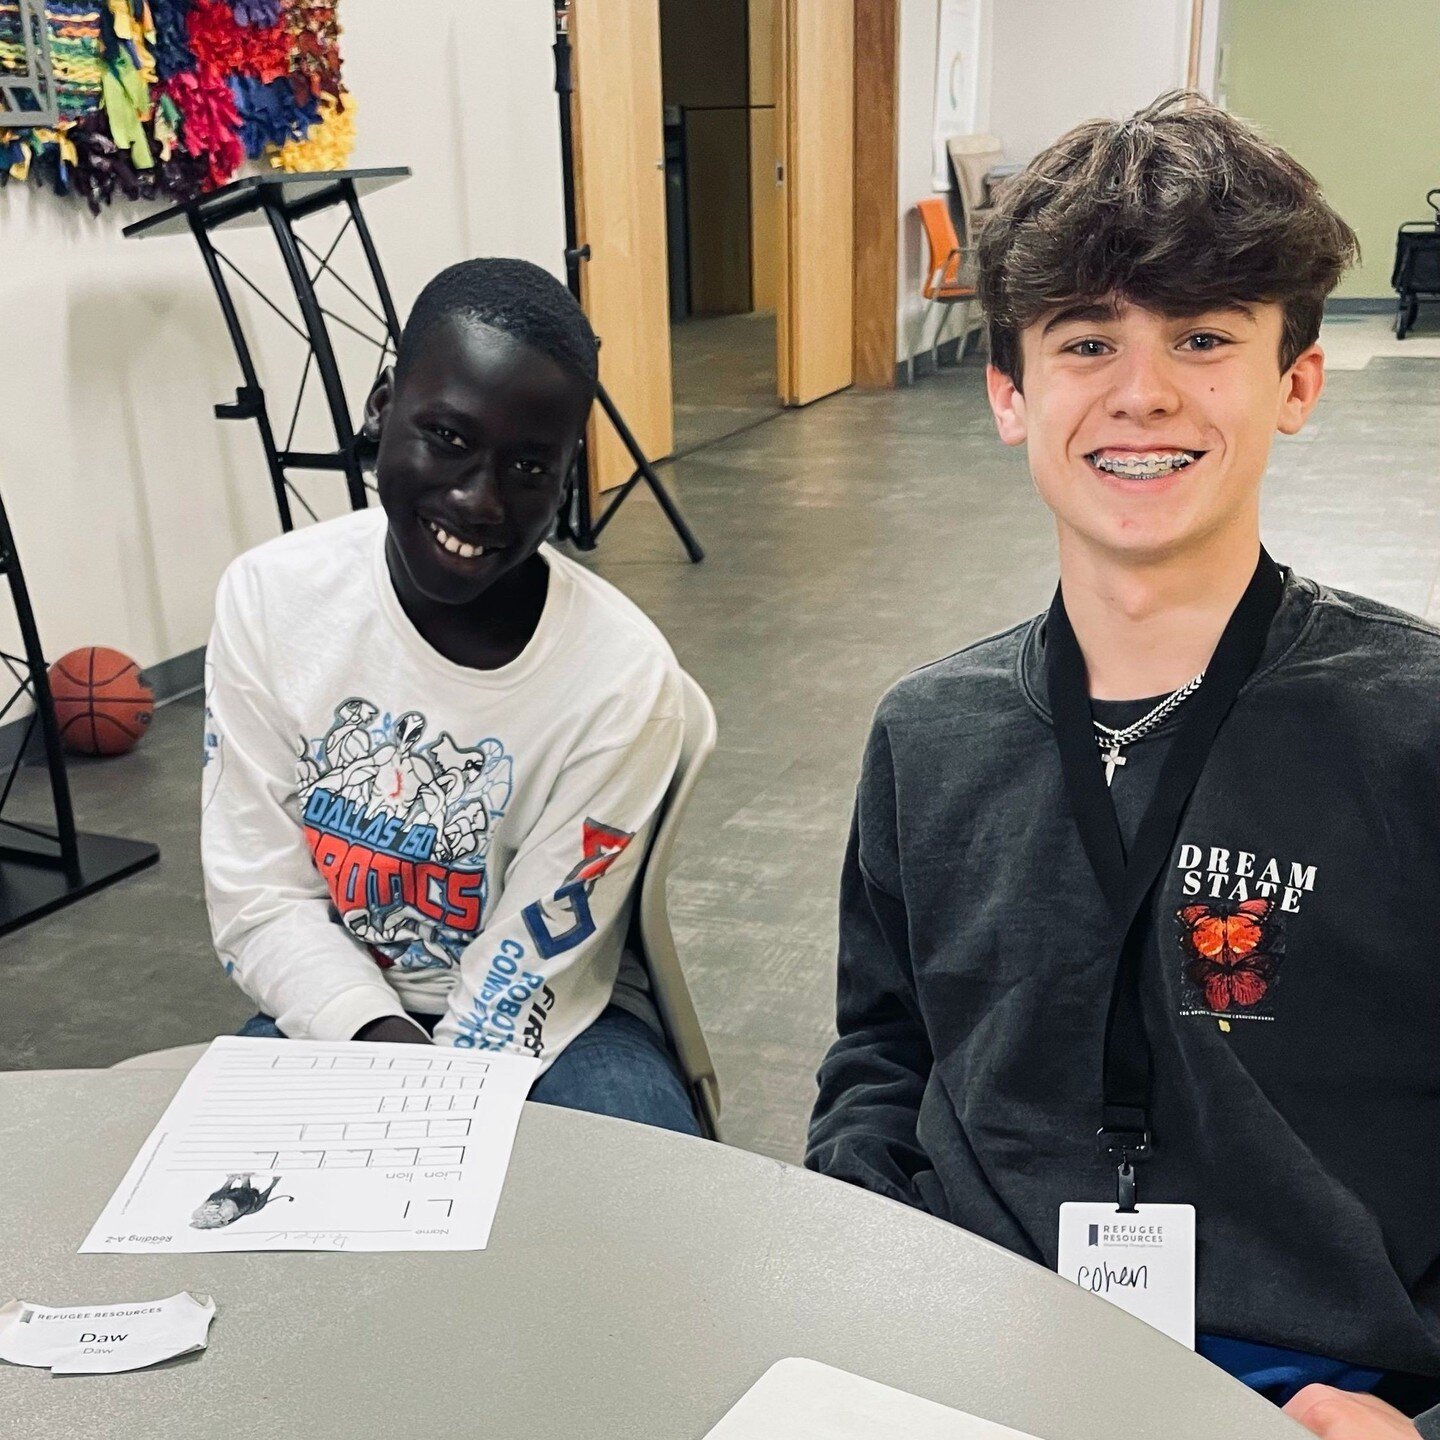 Mentor Spotlight!⁠
⁠
Today, we have a pretty special mentor to introduce to you! The young man on the right is Cohen and he has been a mentor with Refugee Resources since the fall of 2023. While Cohen has only been serving for about six months, he ha